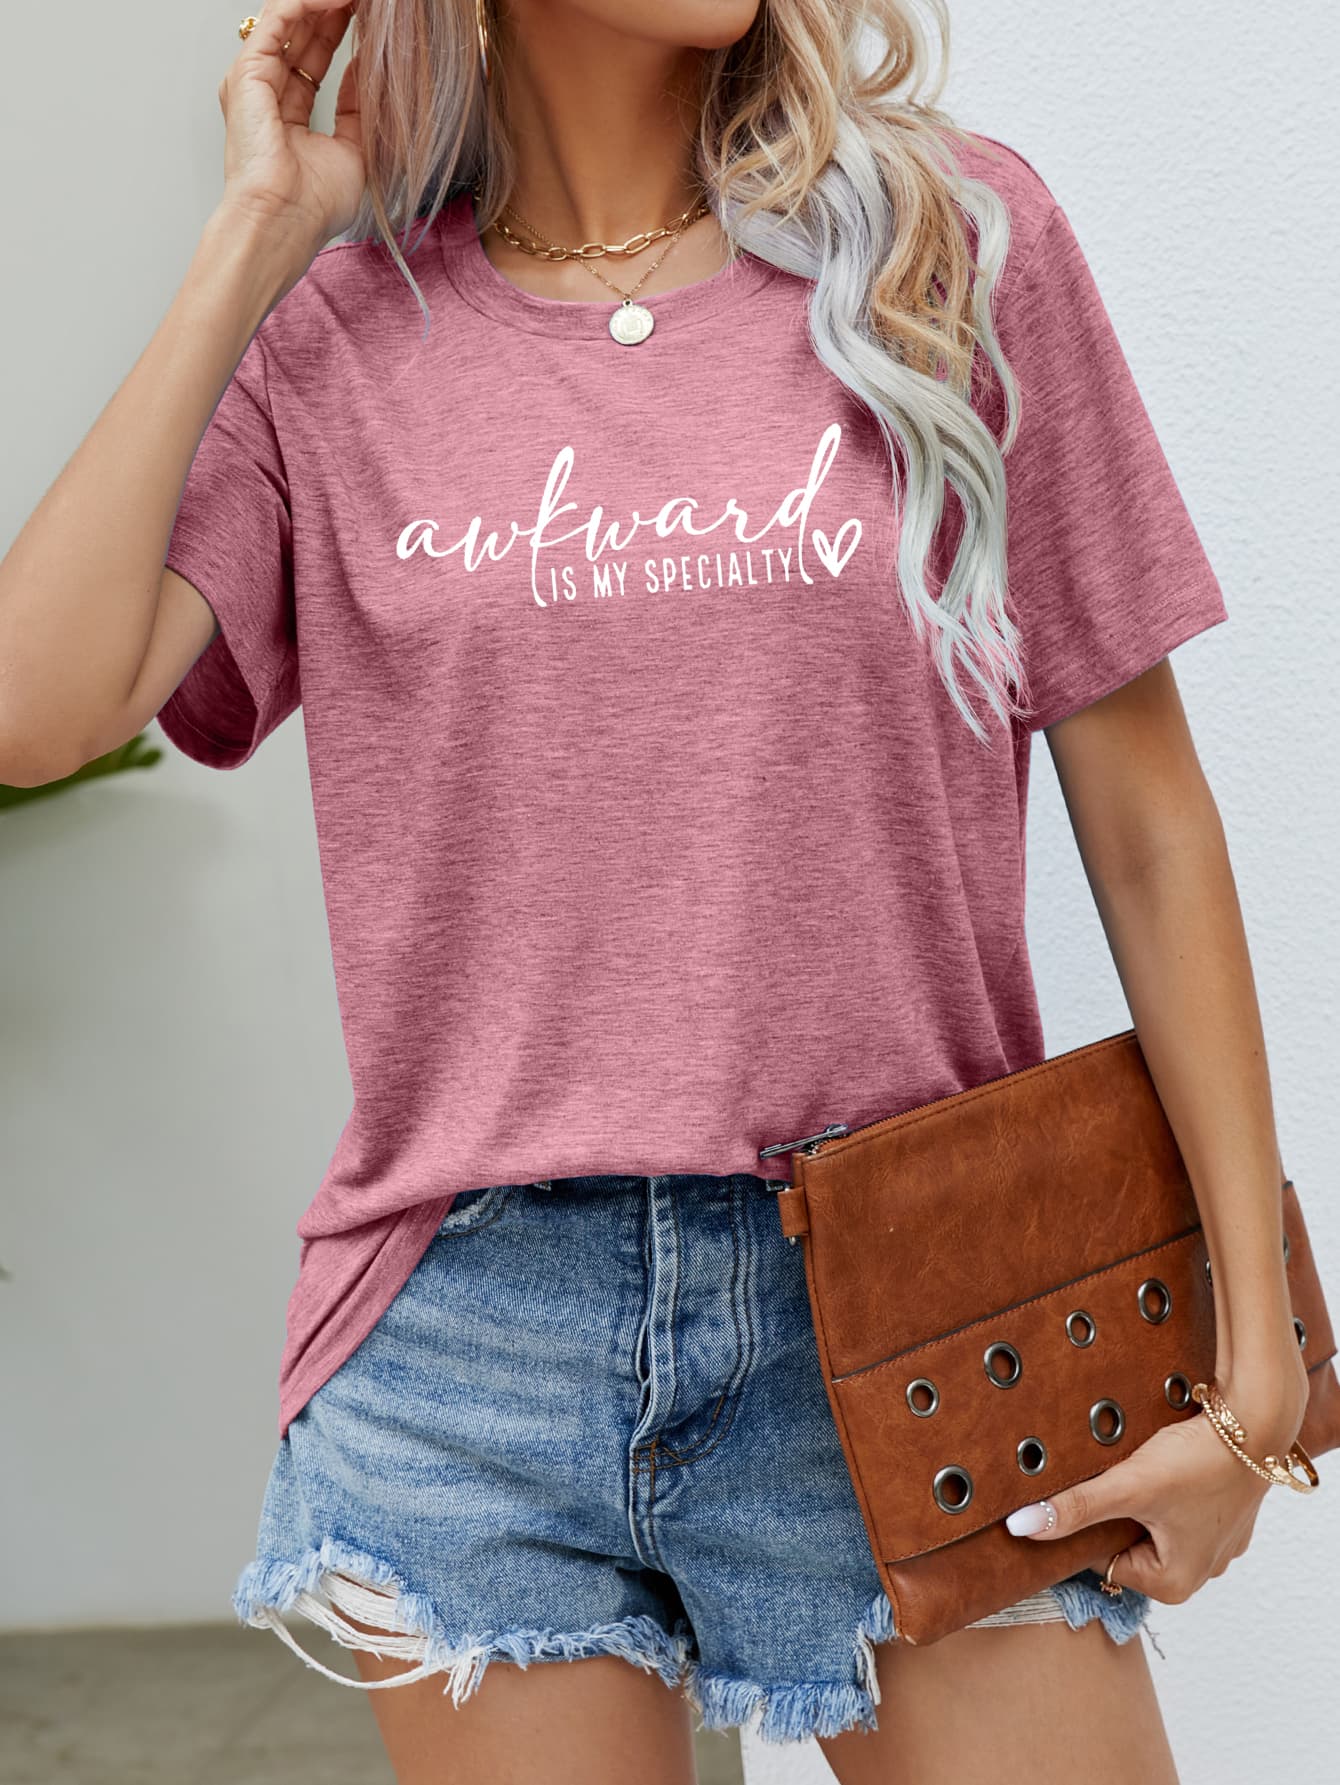 AWKWARD IS MY SPECIALTY Graphic Tee - Dark Pink / S - T-Shirts - Shirts & Tops - 13 - 2024